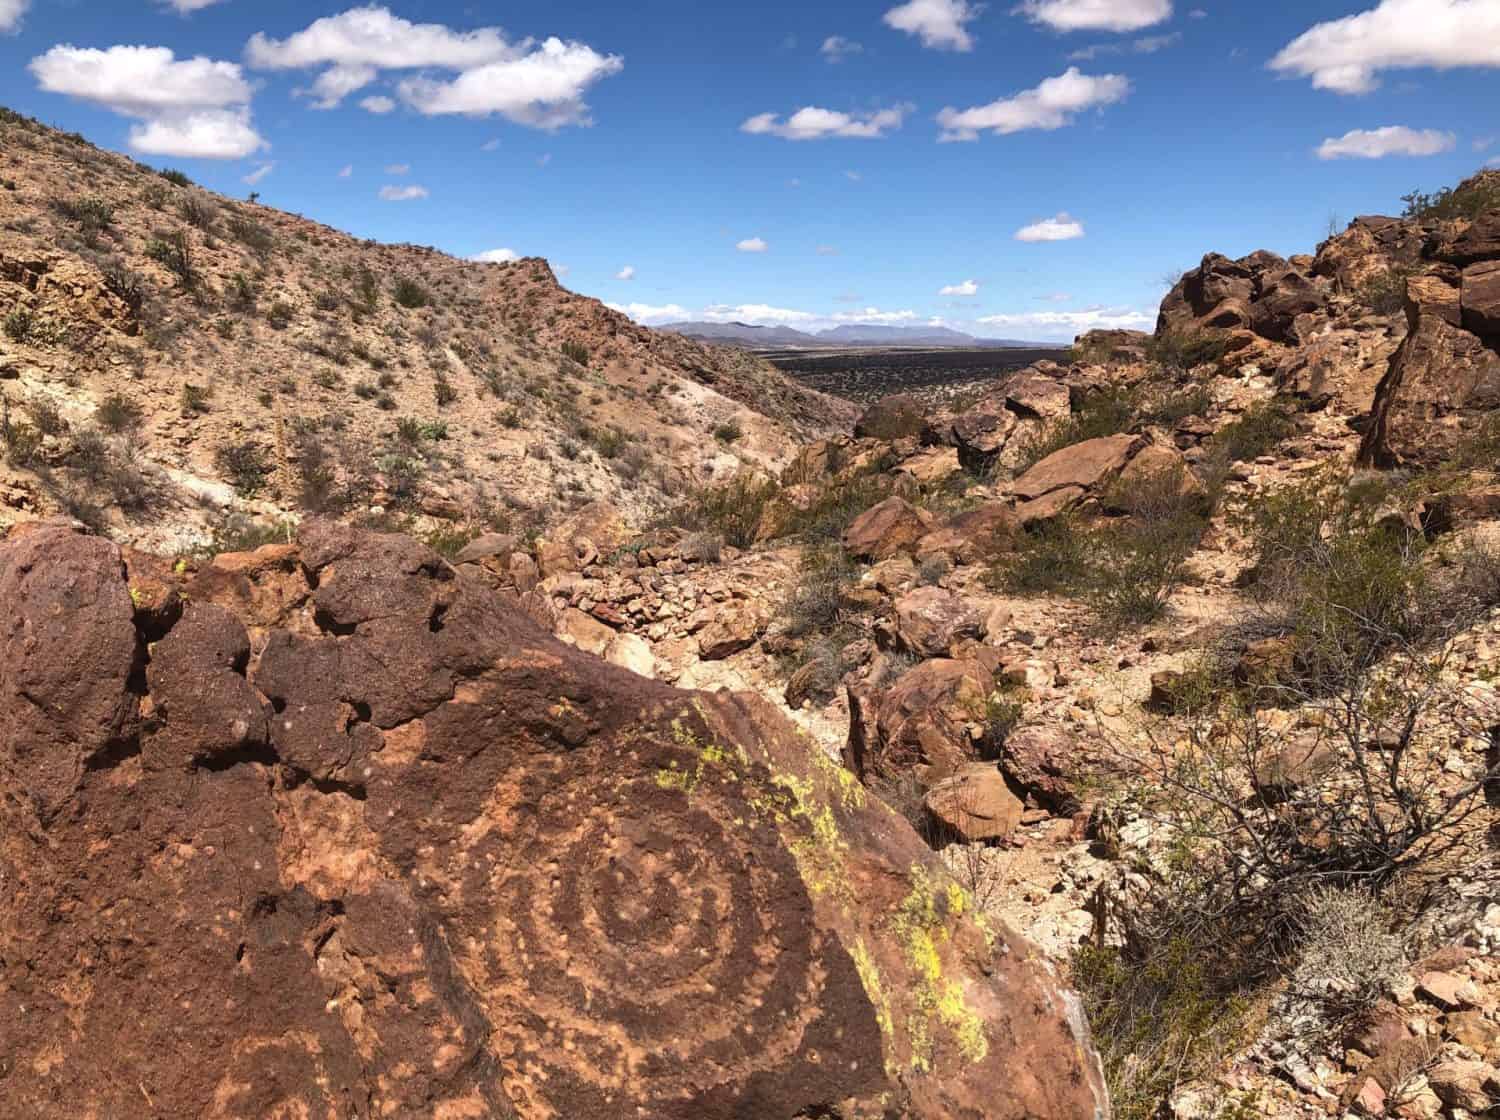 Big blue sky with white fluffy clouds, long view on mountains. Sparse vegetation on rocky hills and spiral petroglyph in the foreground.